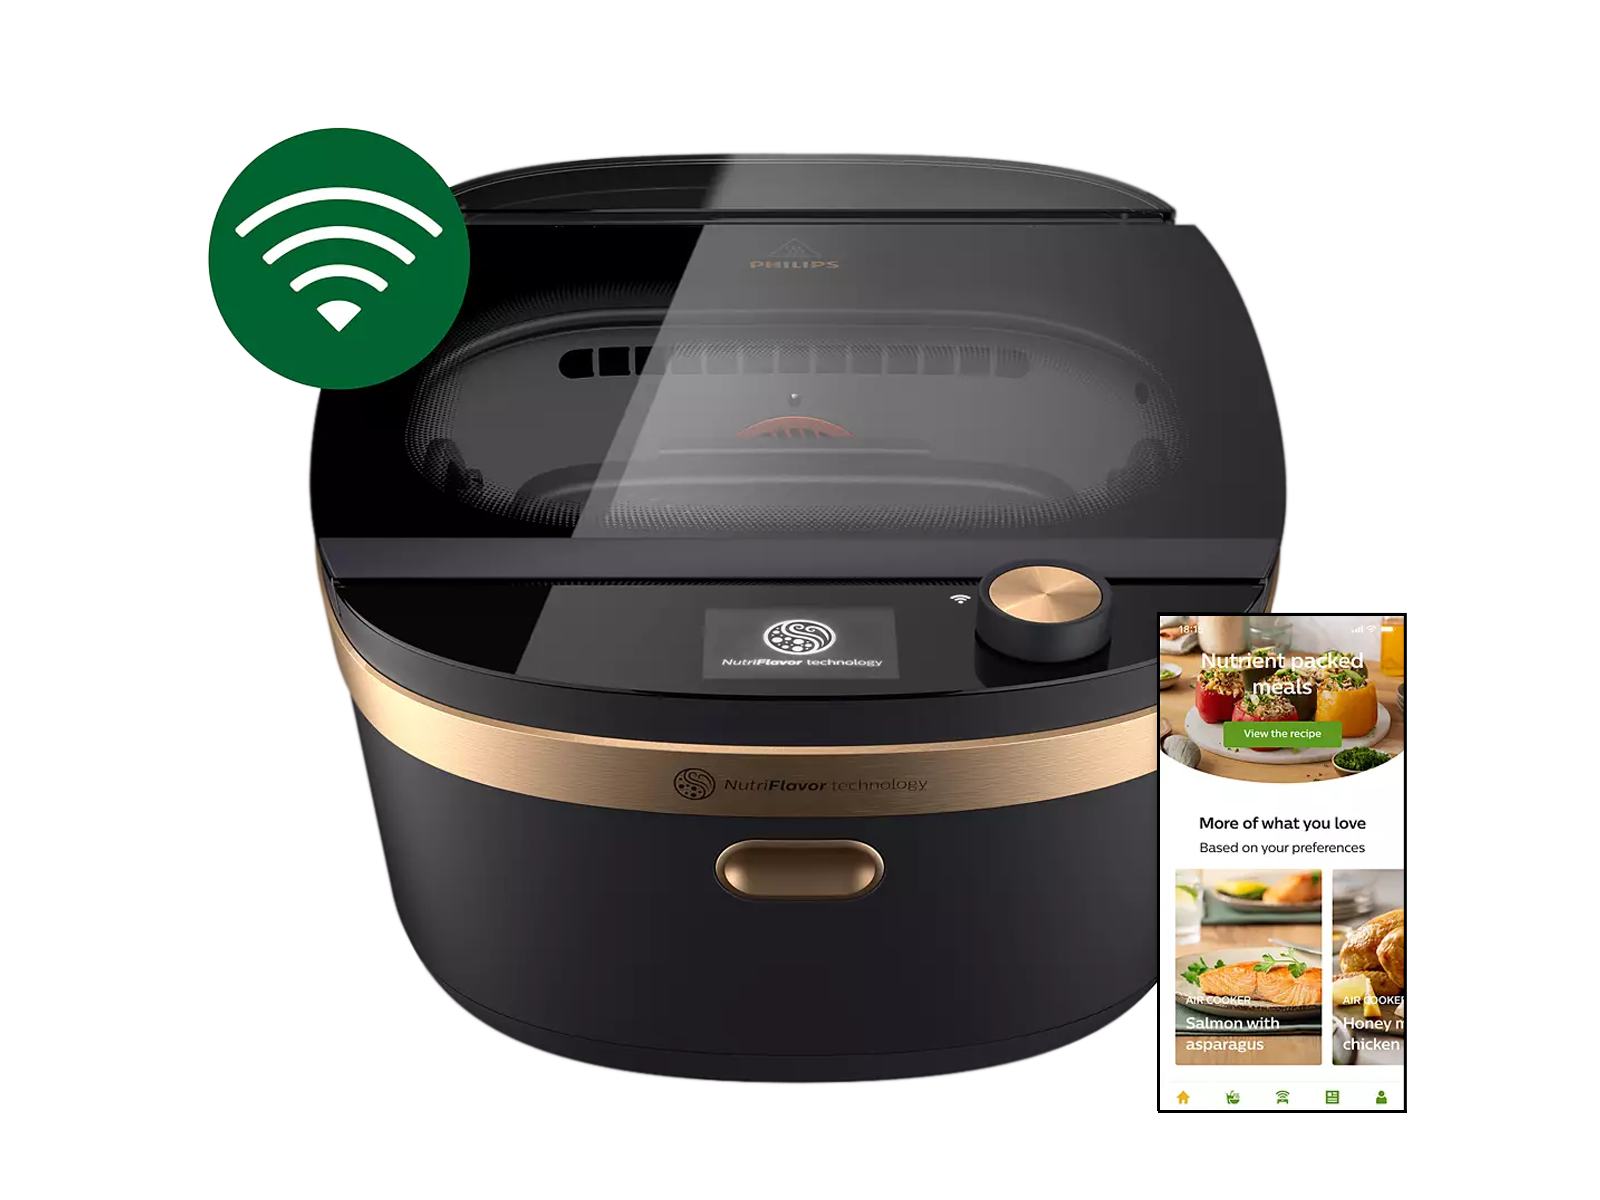 philips-air-cooker-7000-series-nx096090